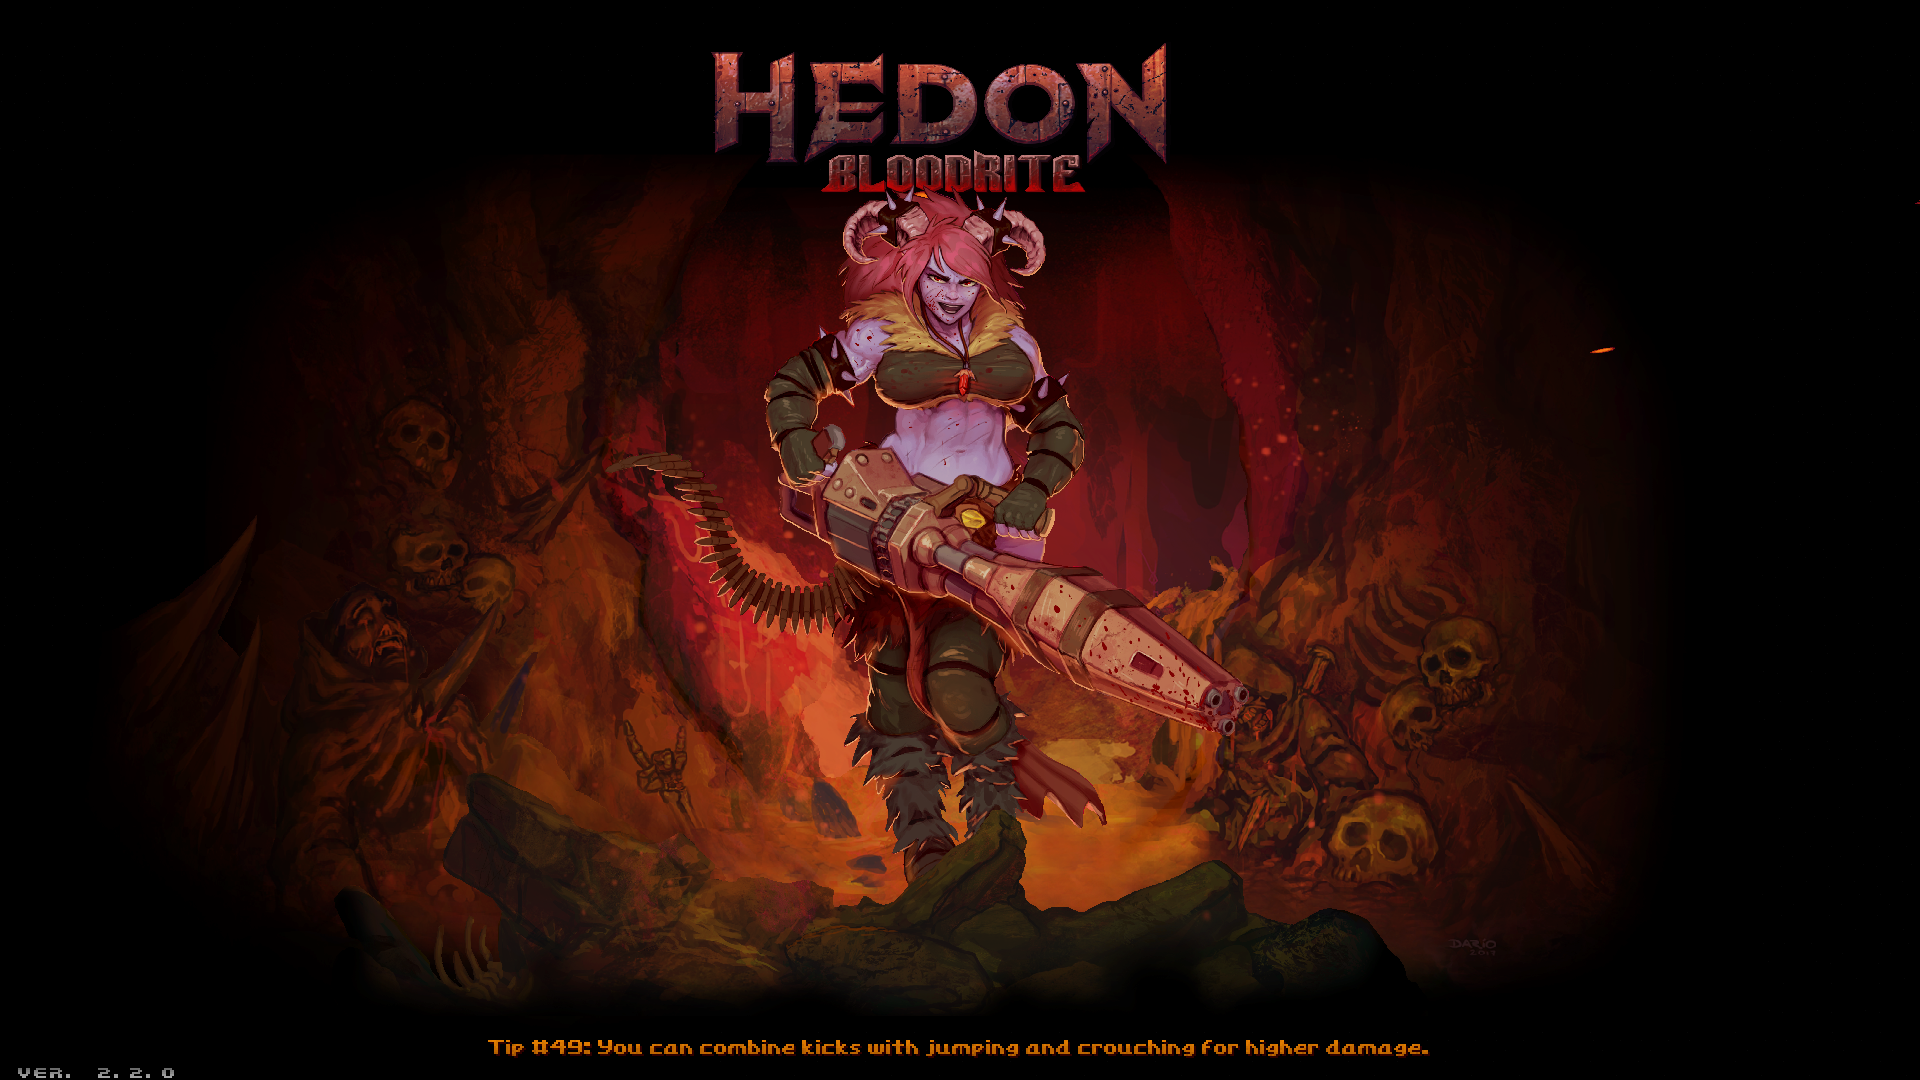 What if Hexen Was a Girl? – Let’s Play Hedon Bloodrite [Wildcard Wednesdays]